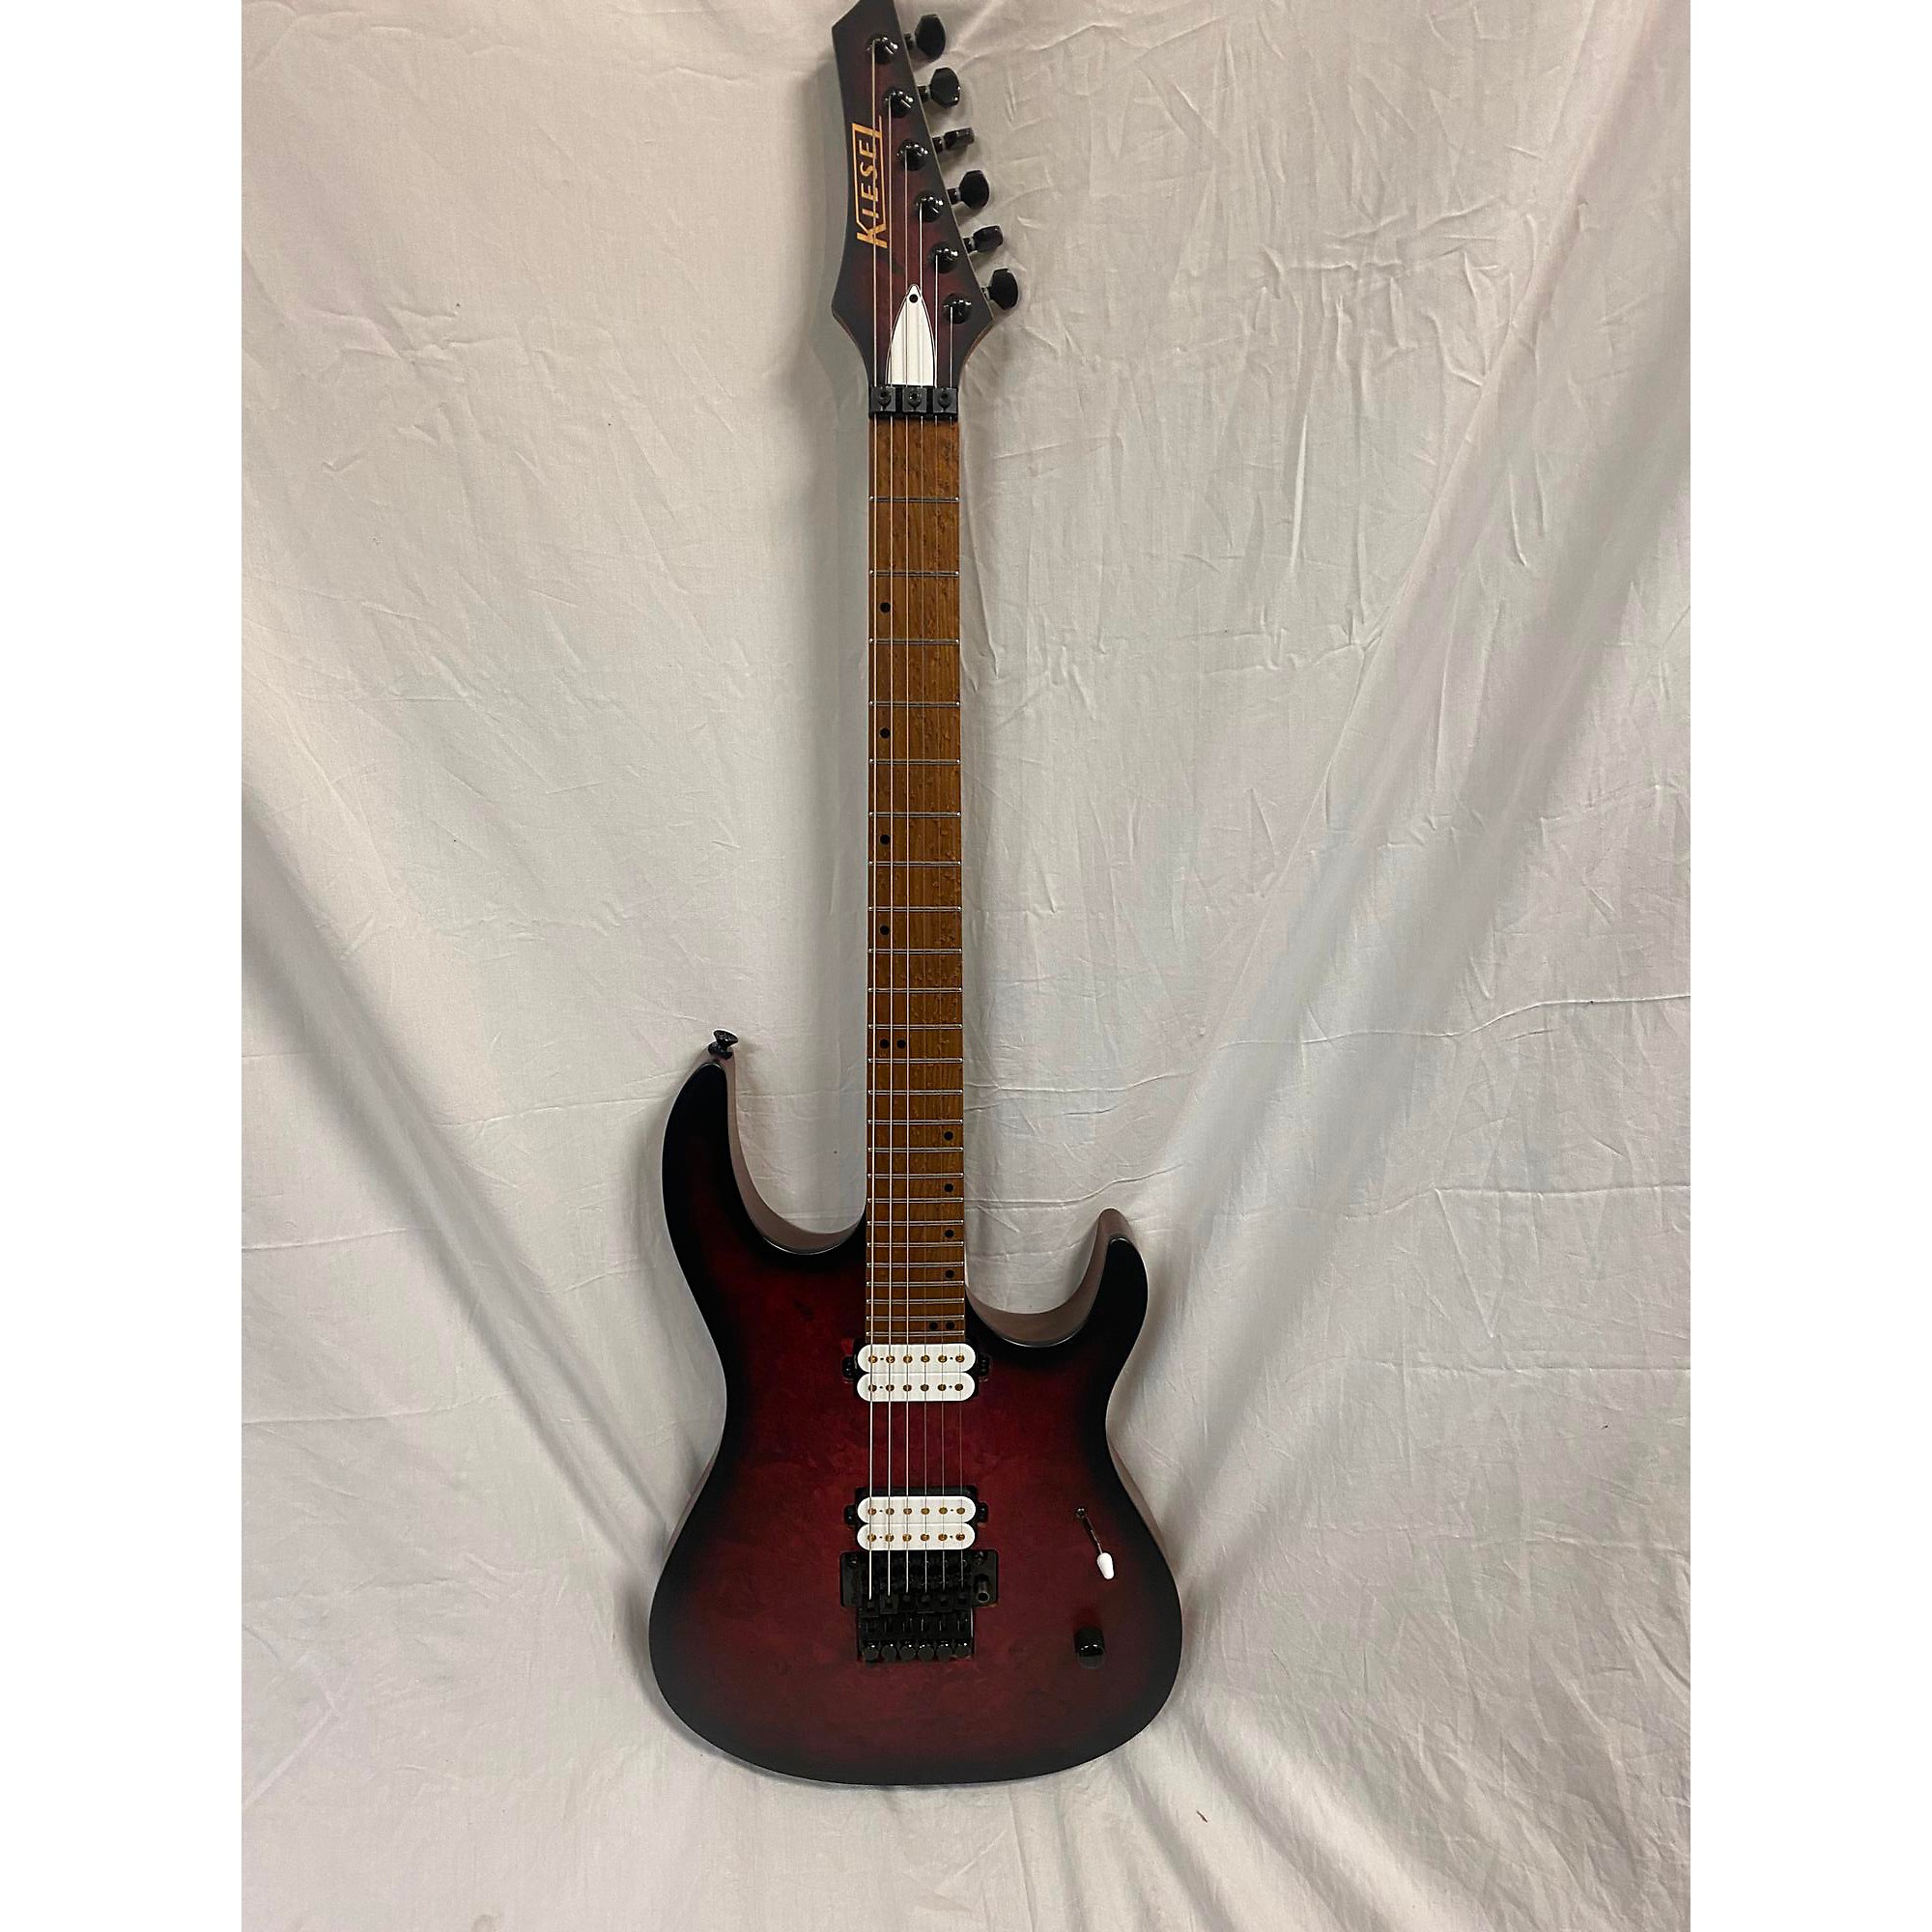 Used Used 2022 KIESEL DC600 CST RASBERRY JAM Solid Body Electric Guitar  Guitar Center